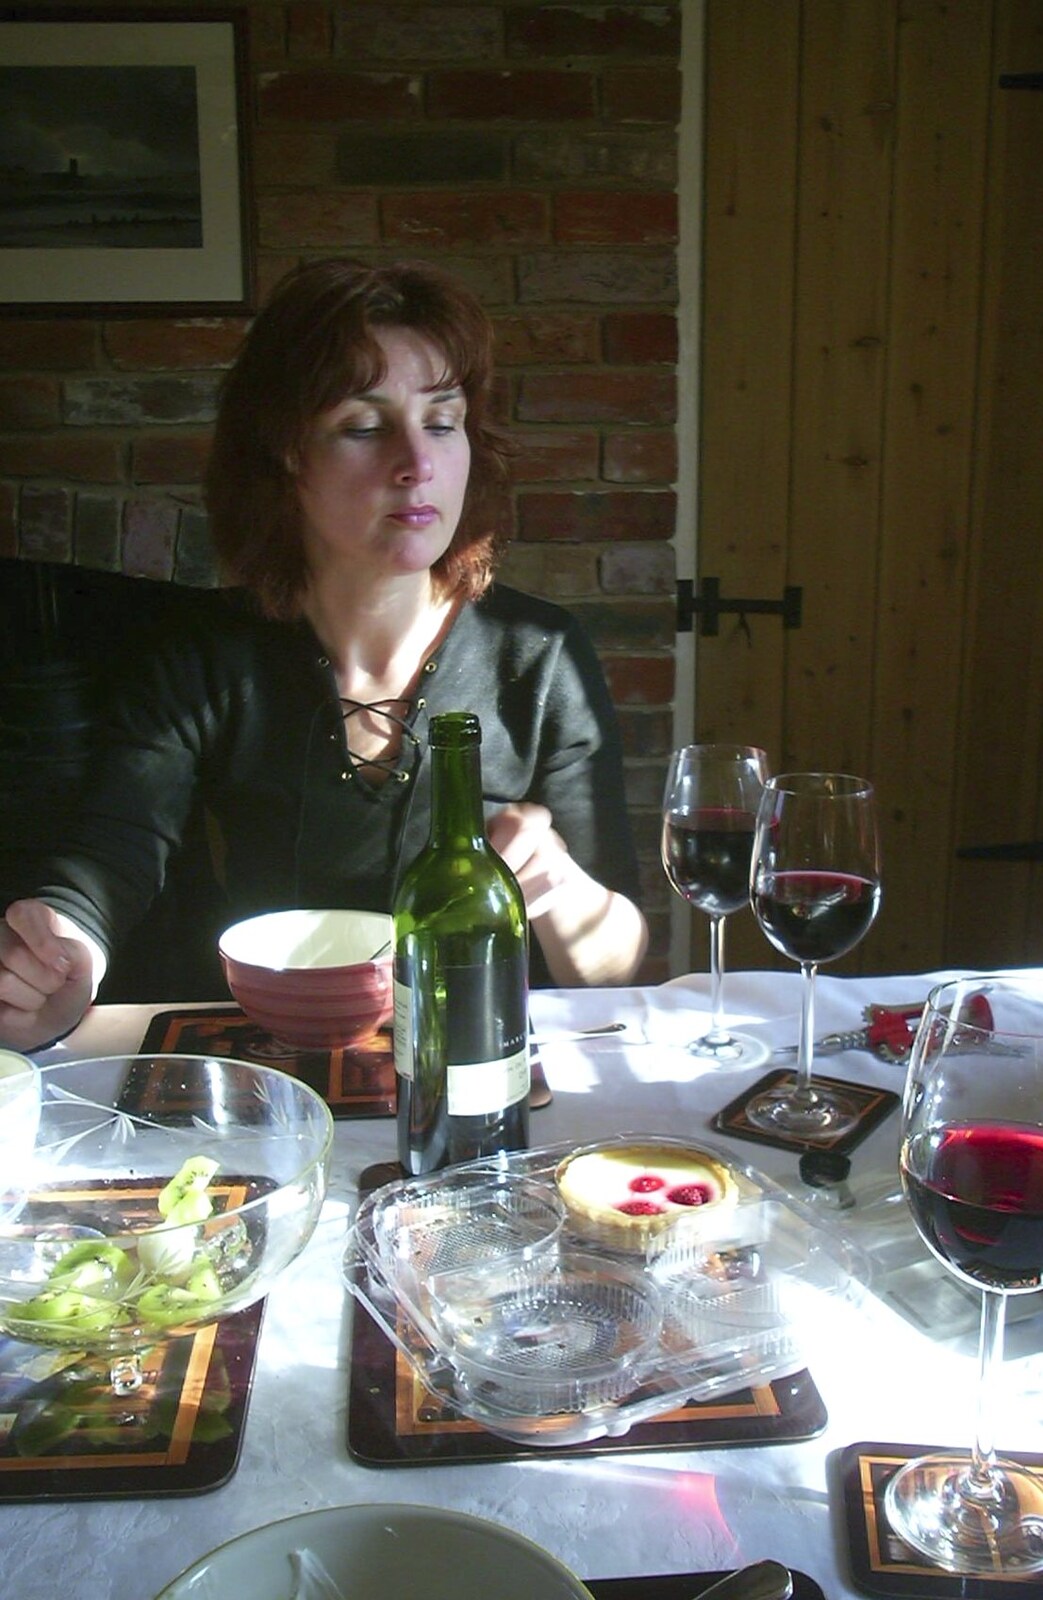 Anne surveys her two glasses of red wine from Carolyn on Sunday, Wymondham, Norfolk - 23rd March 2003